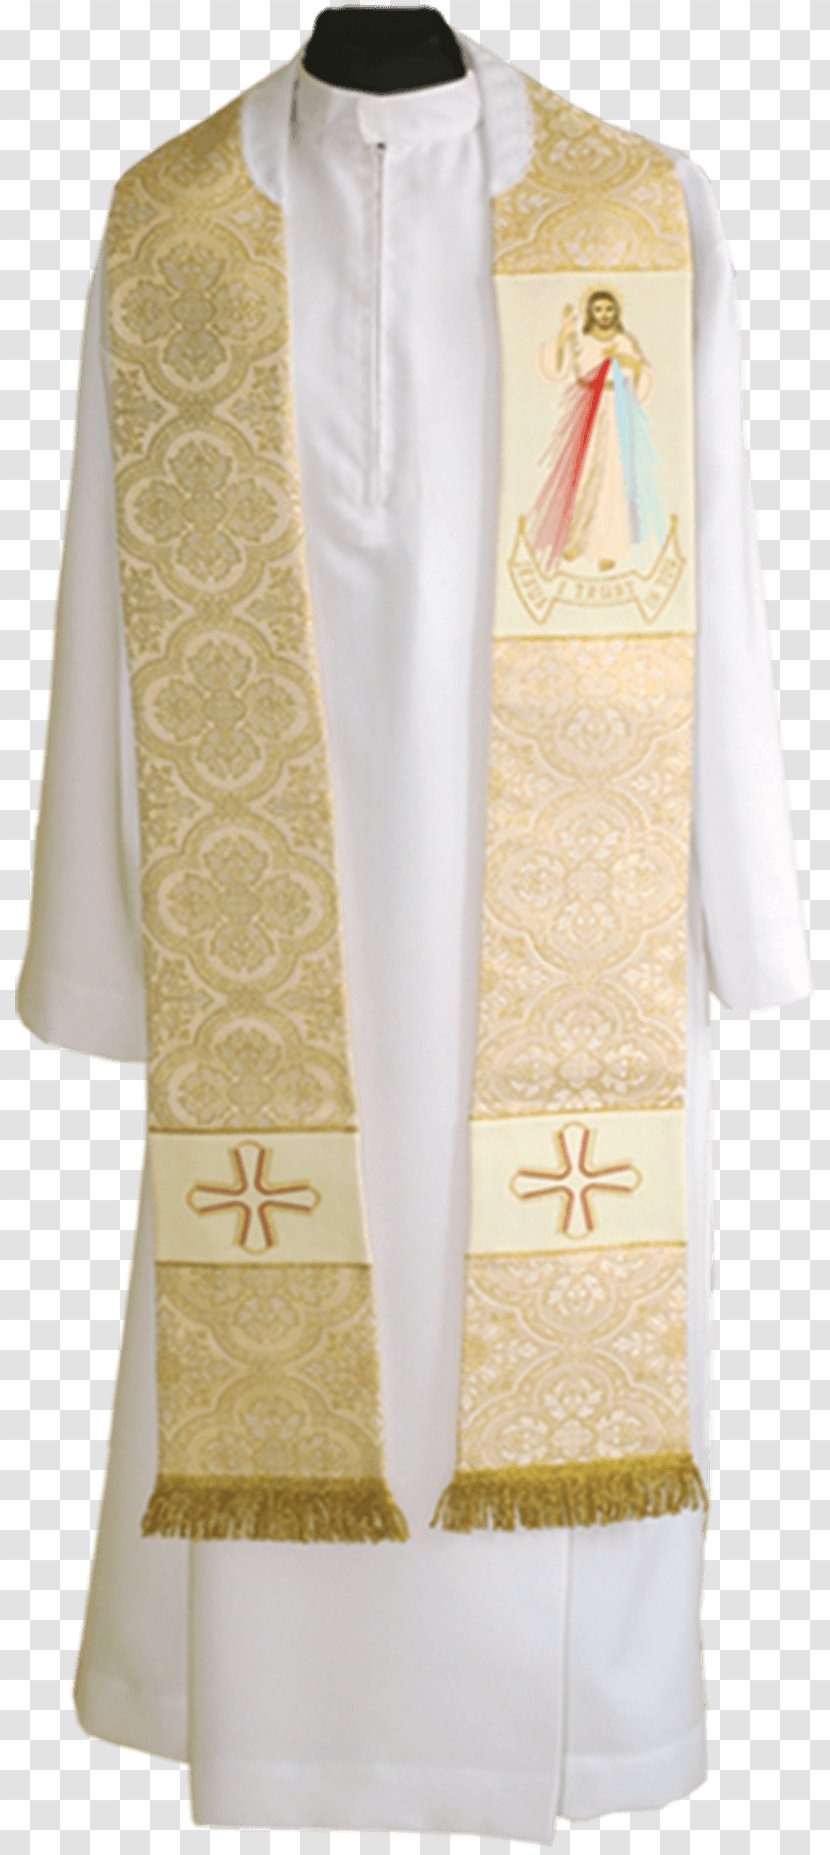 Sleeve Clothes Hanger Blouse Divine Mercy Outerwear - Image Transparent PNG